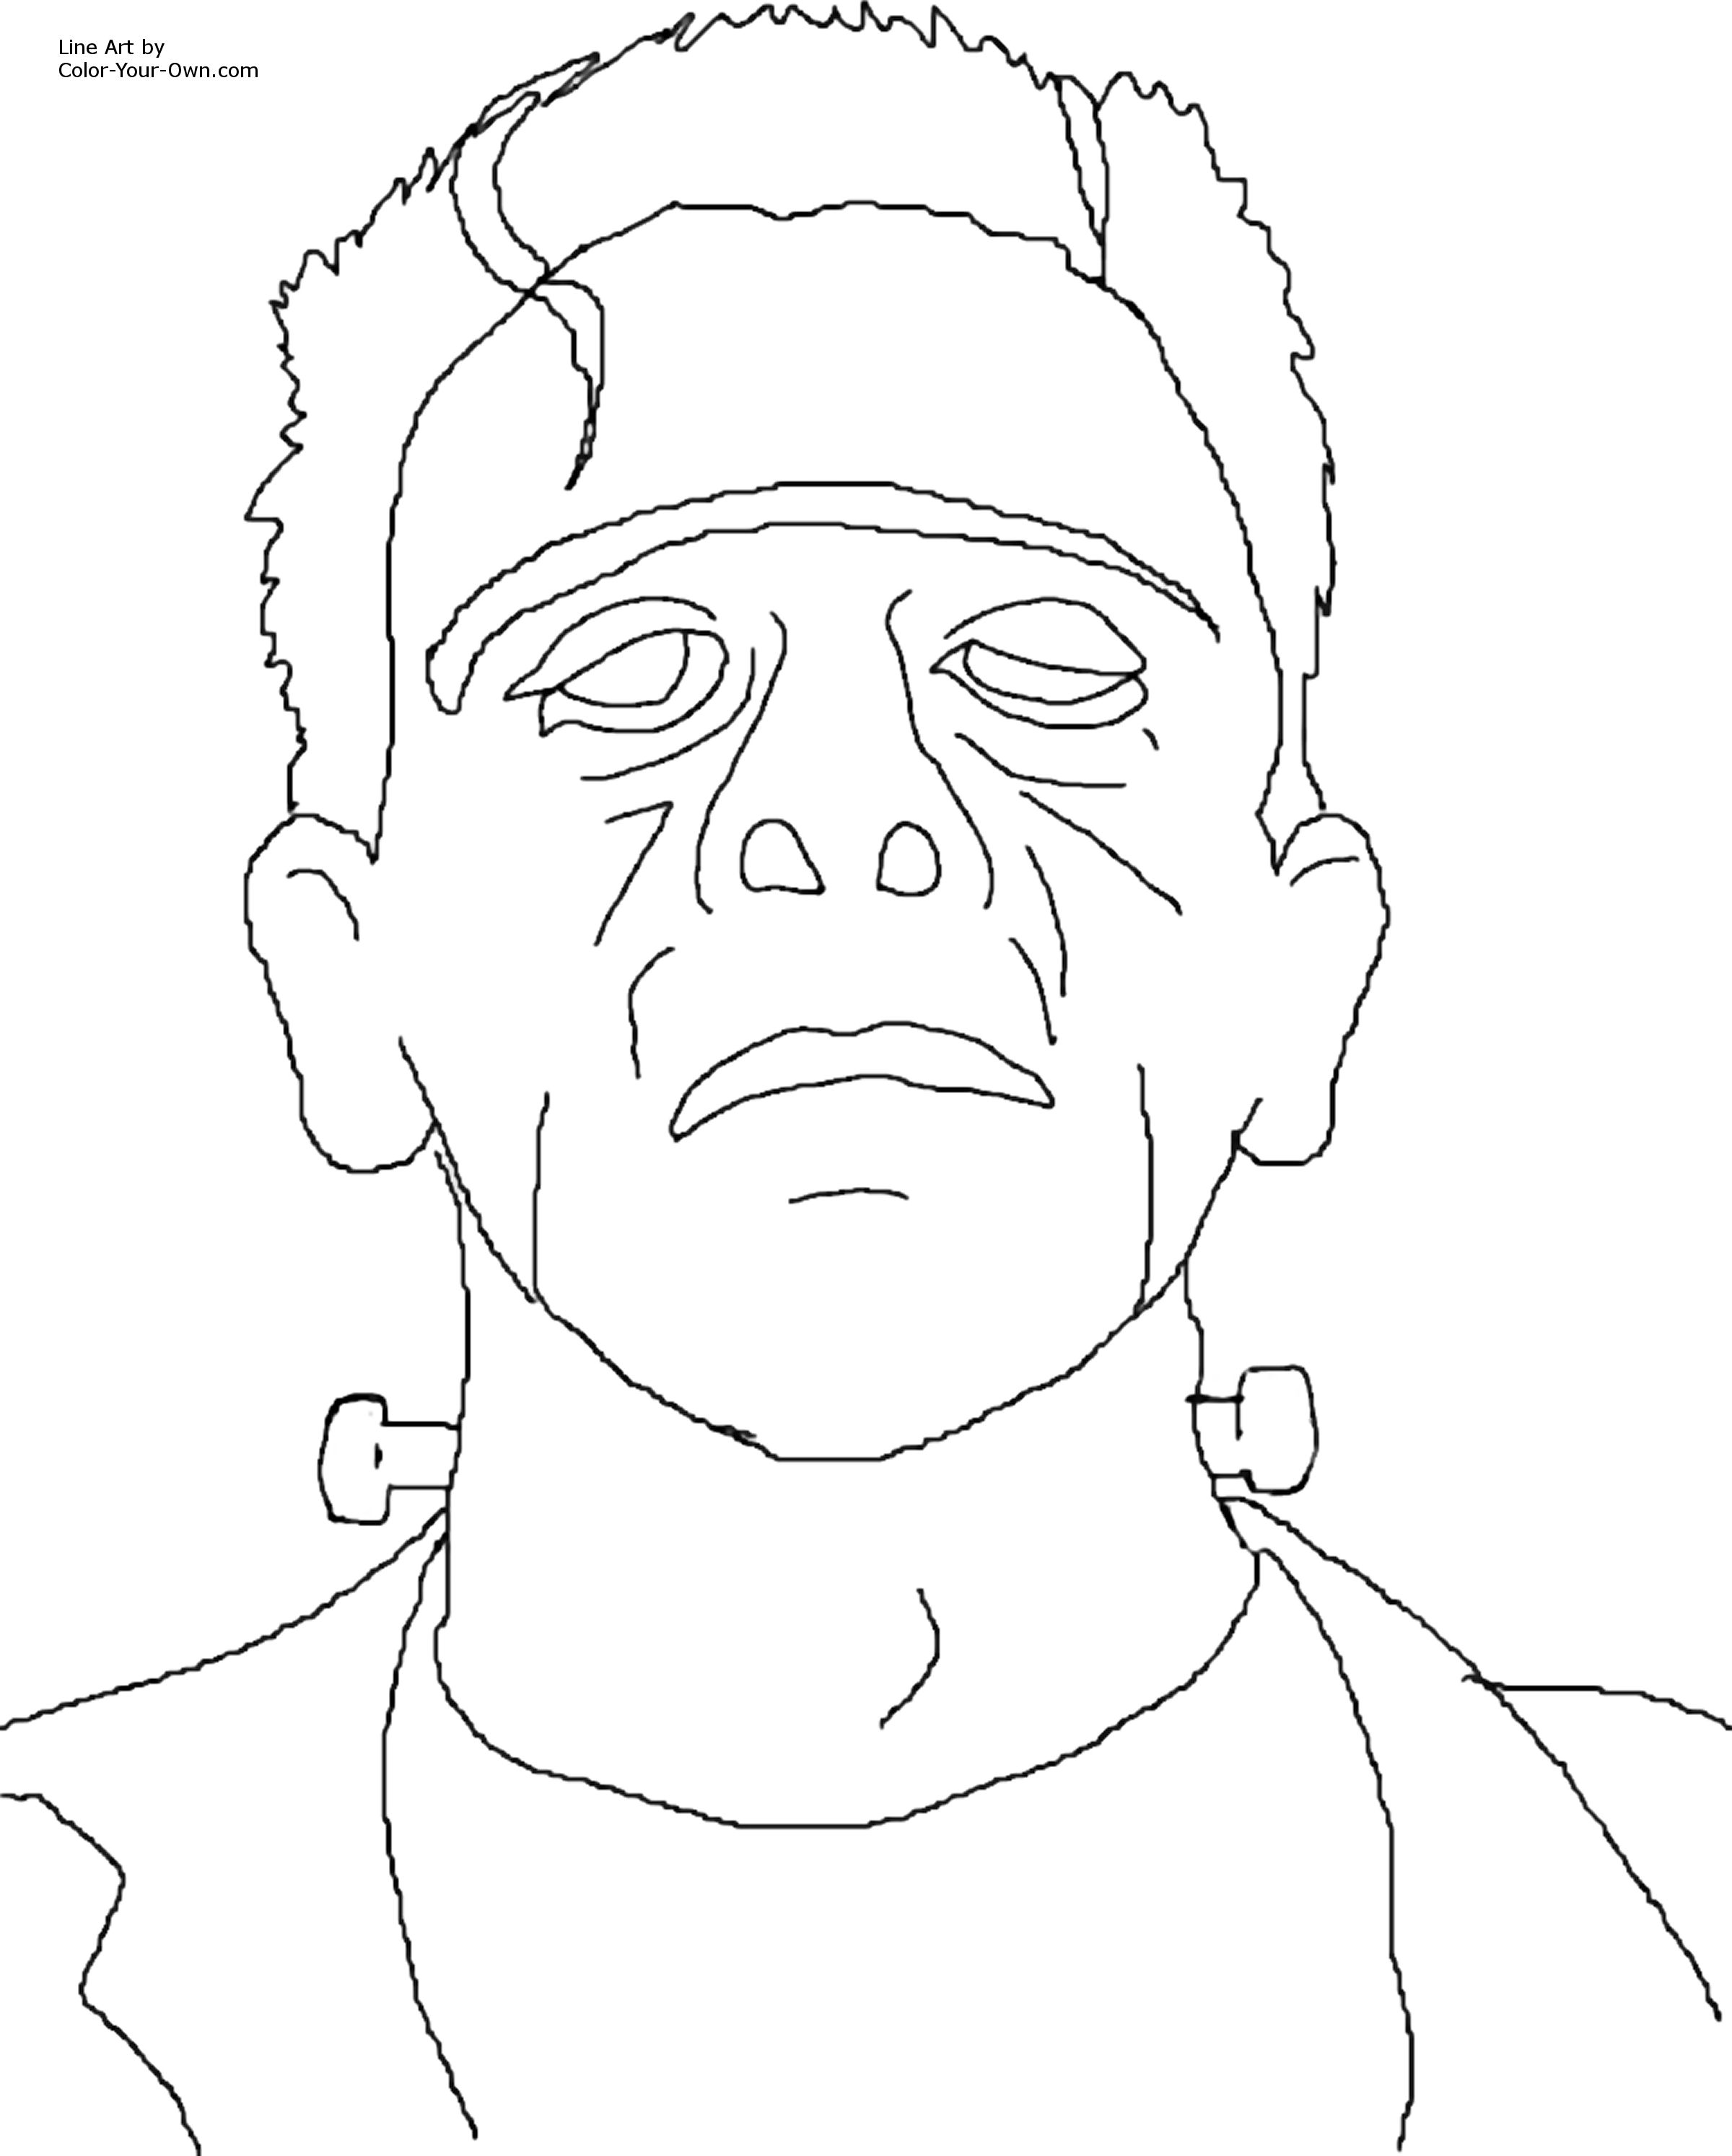 frankenstein-face-drawing-at-getdrawings-free-download